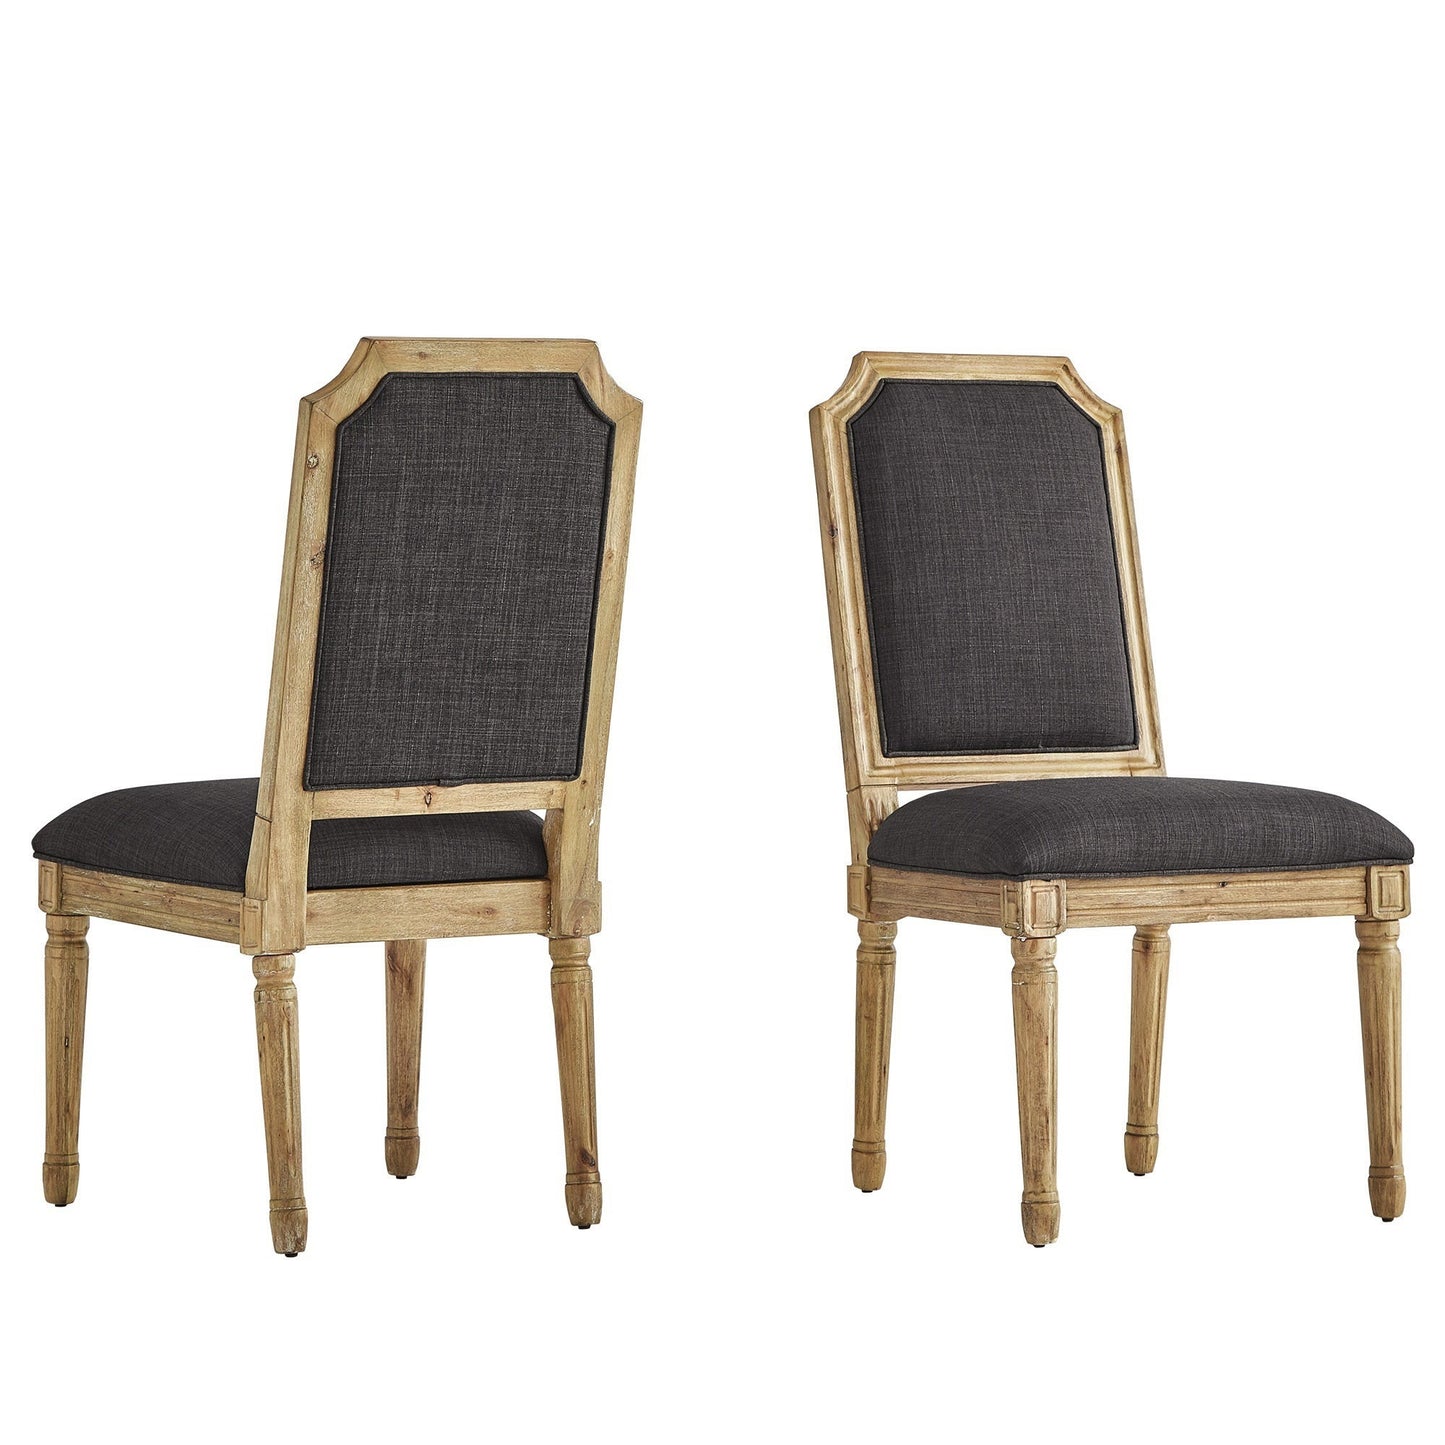 Arched Linen and Wood Dining Chairs (Set of 2) - Dark Grey Linen, Natural Finish